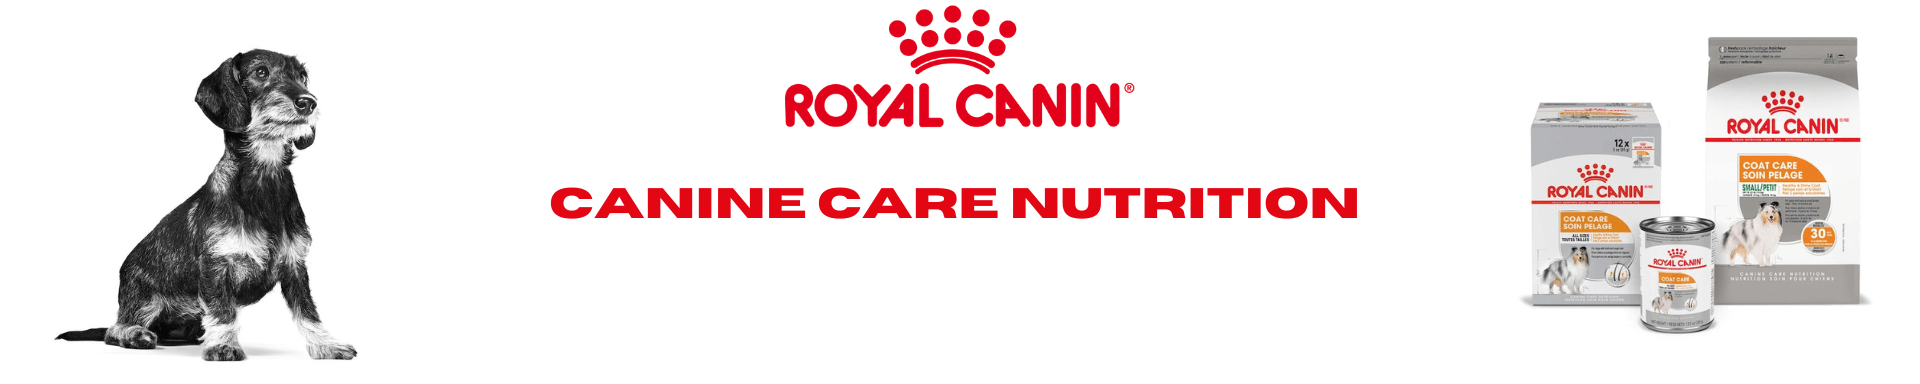 Royal Canin Canine Care Nutrition - The Pets Club